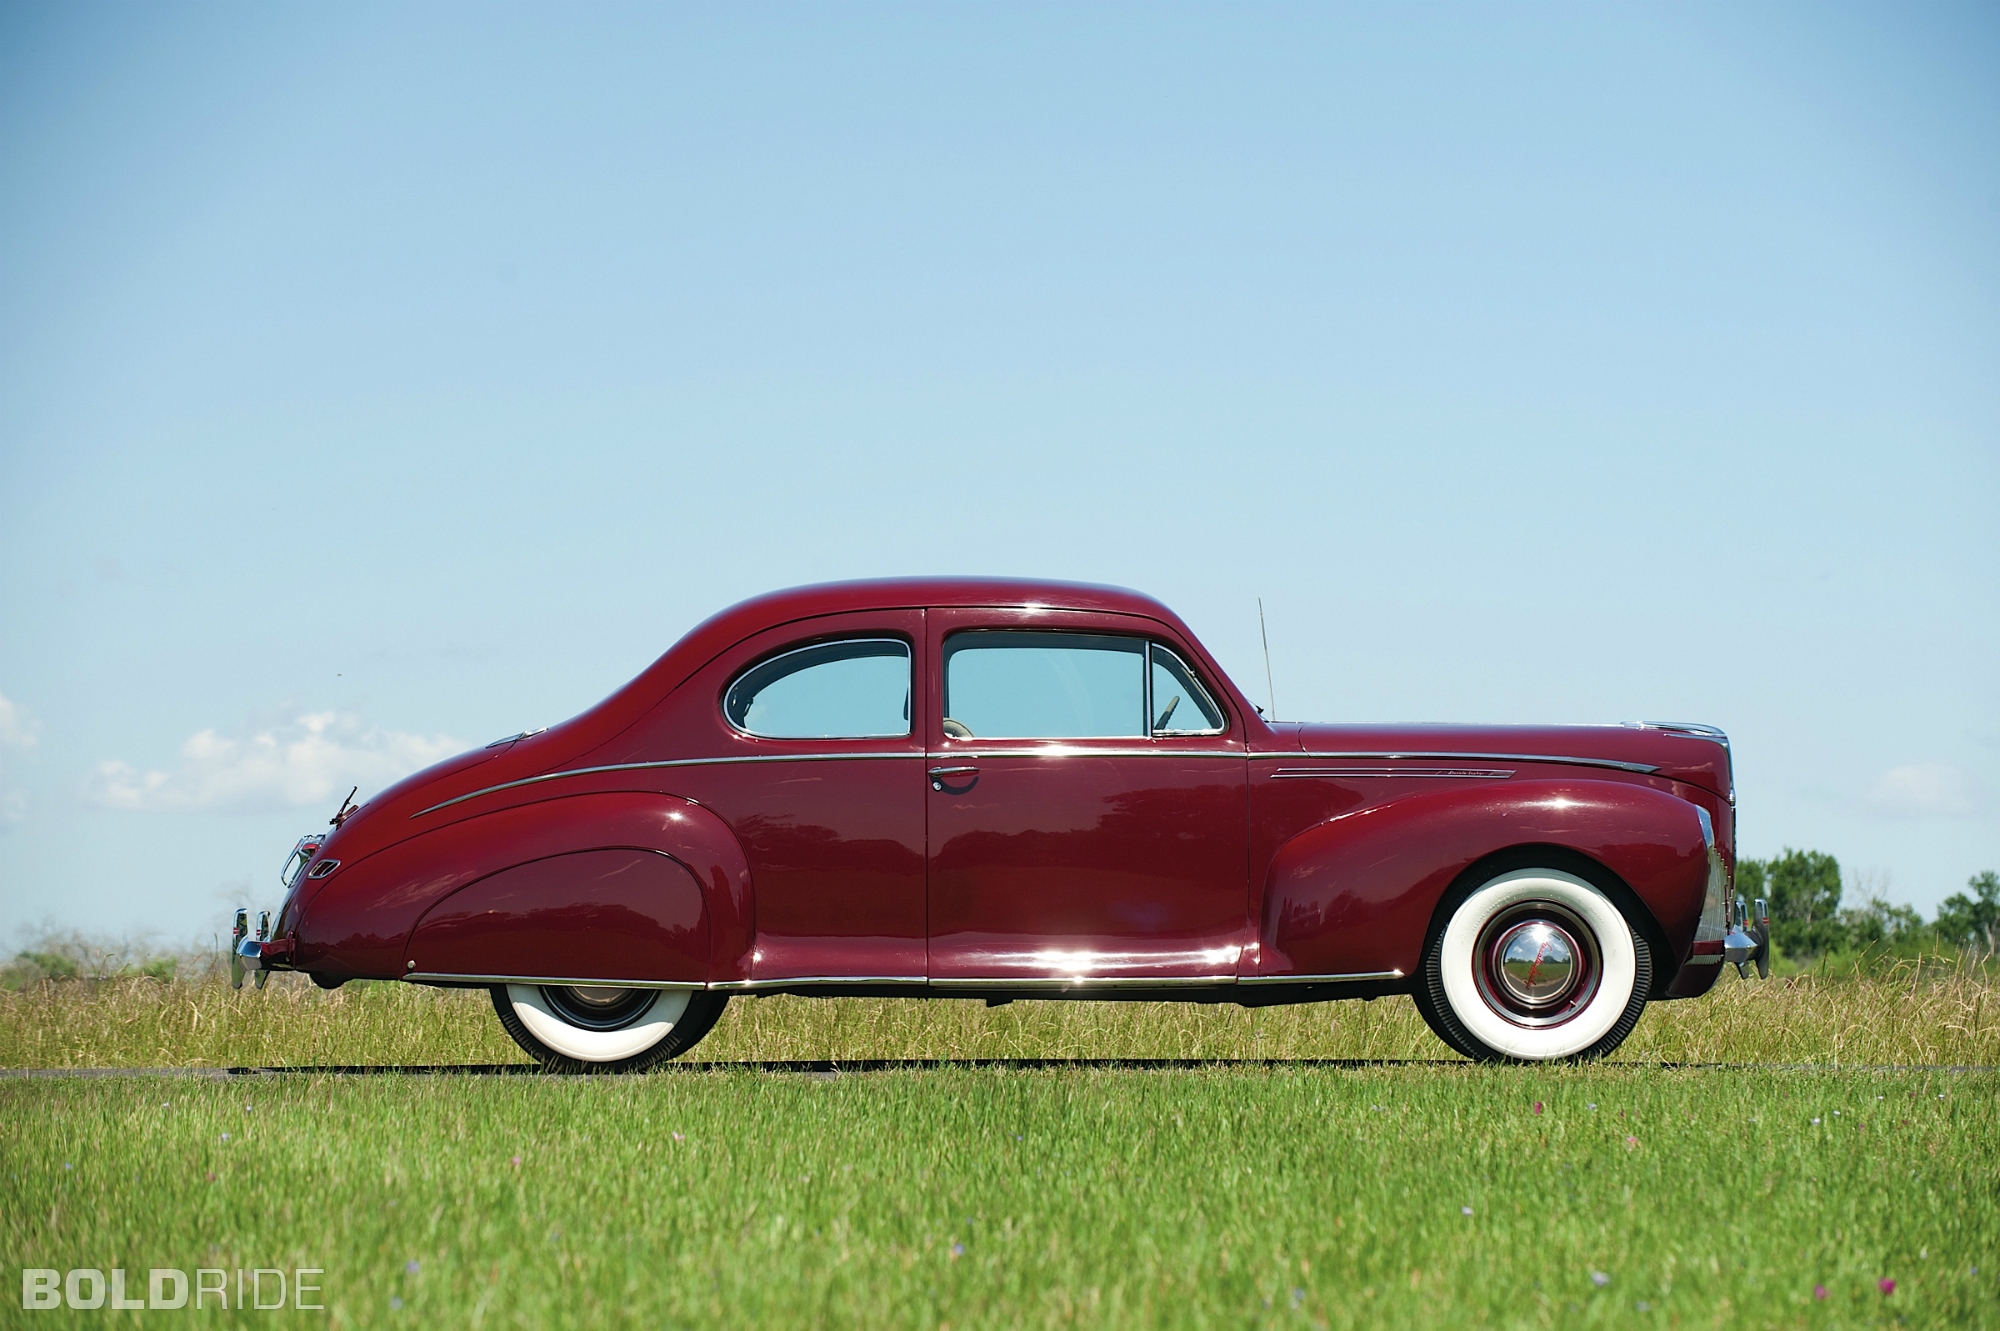 Lincoln Zephyr Club Coupe